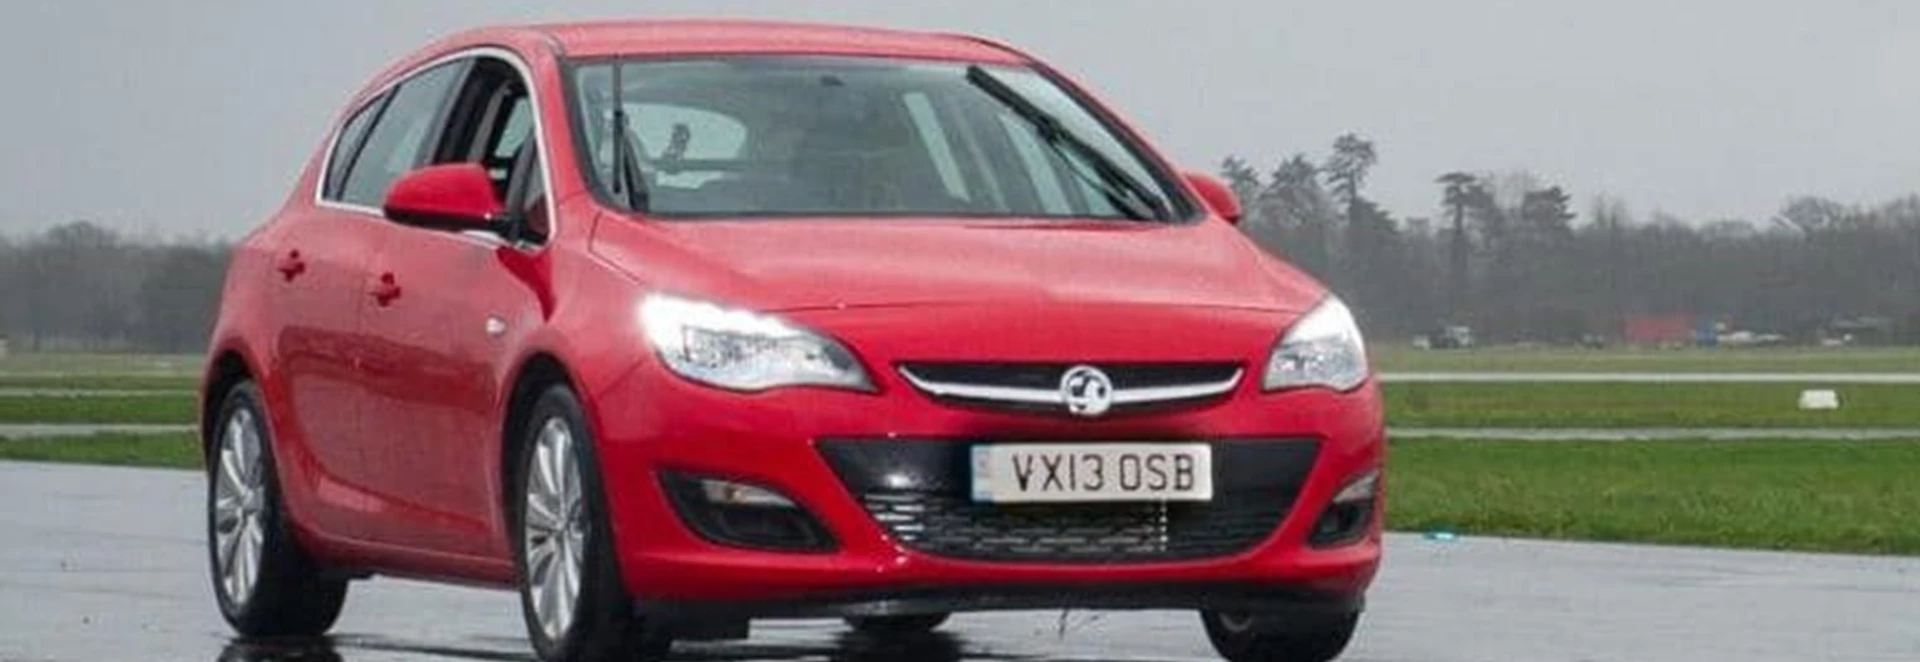 Top Gear Reasonably Priced Astra up for grabs 